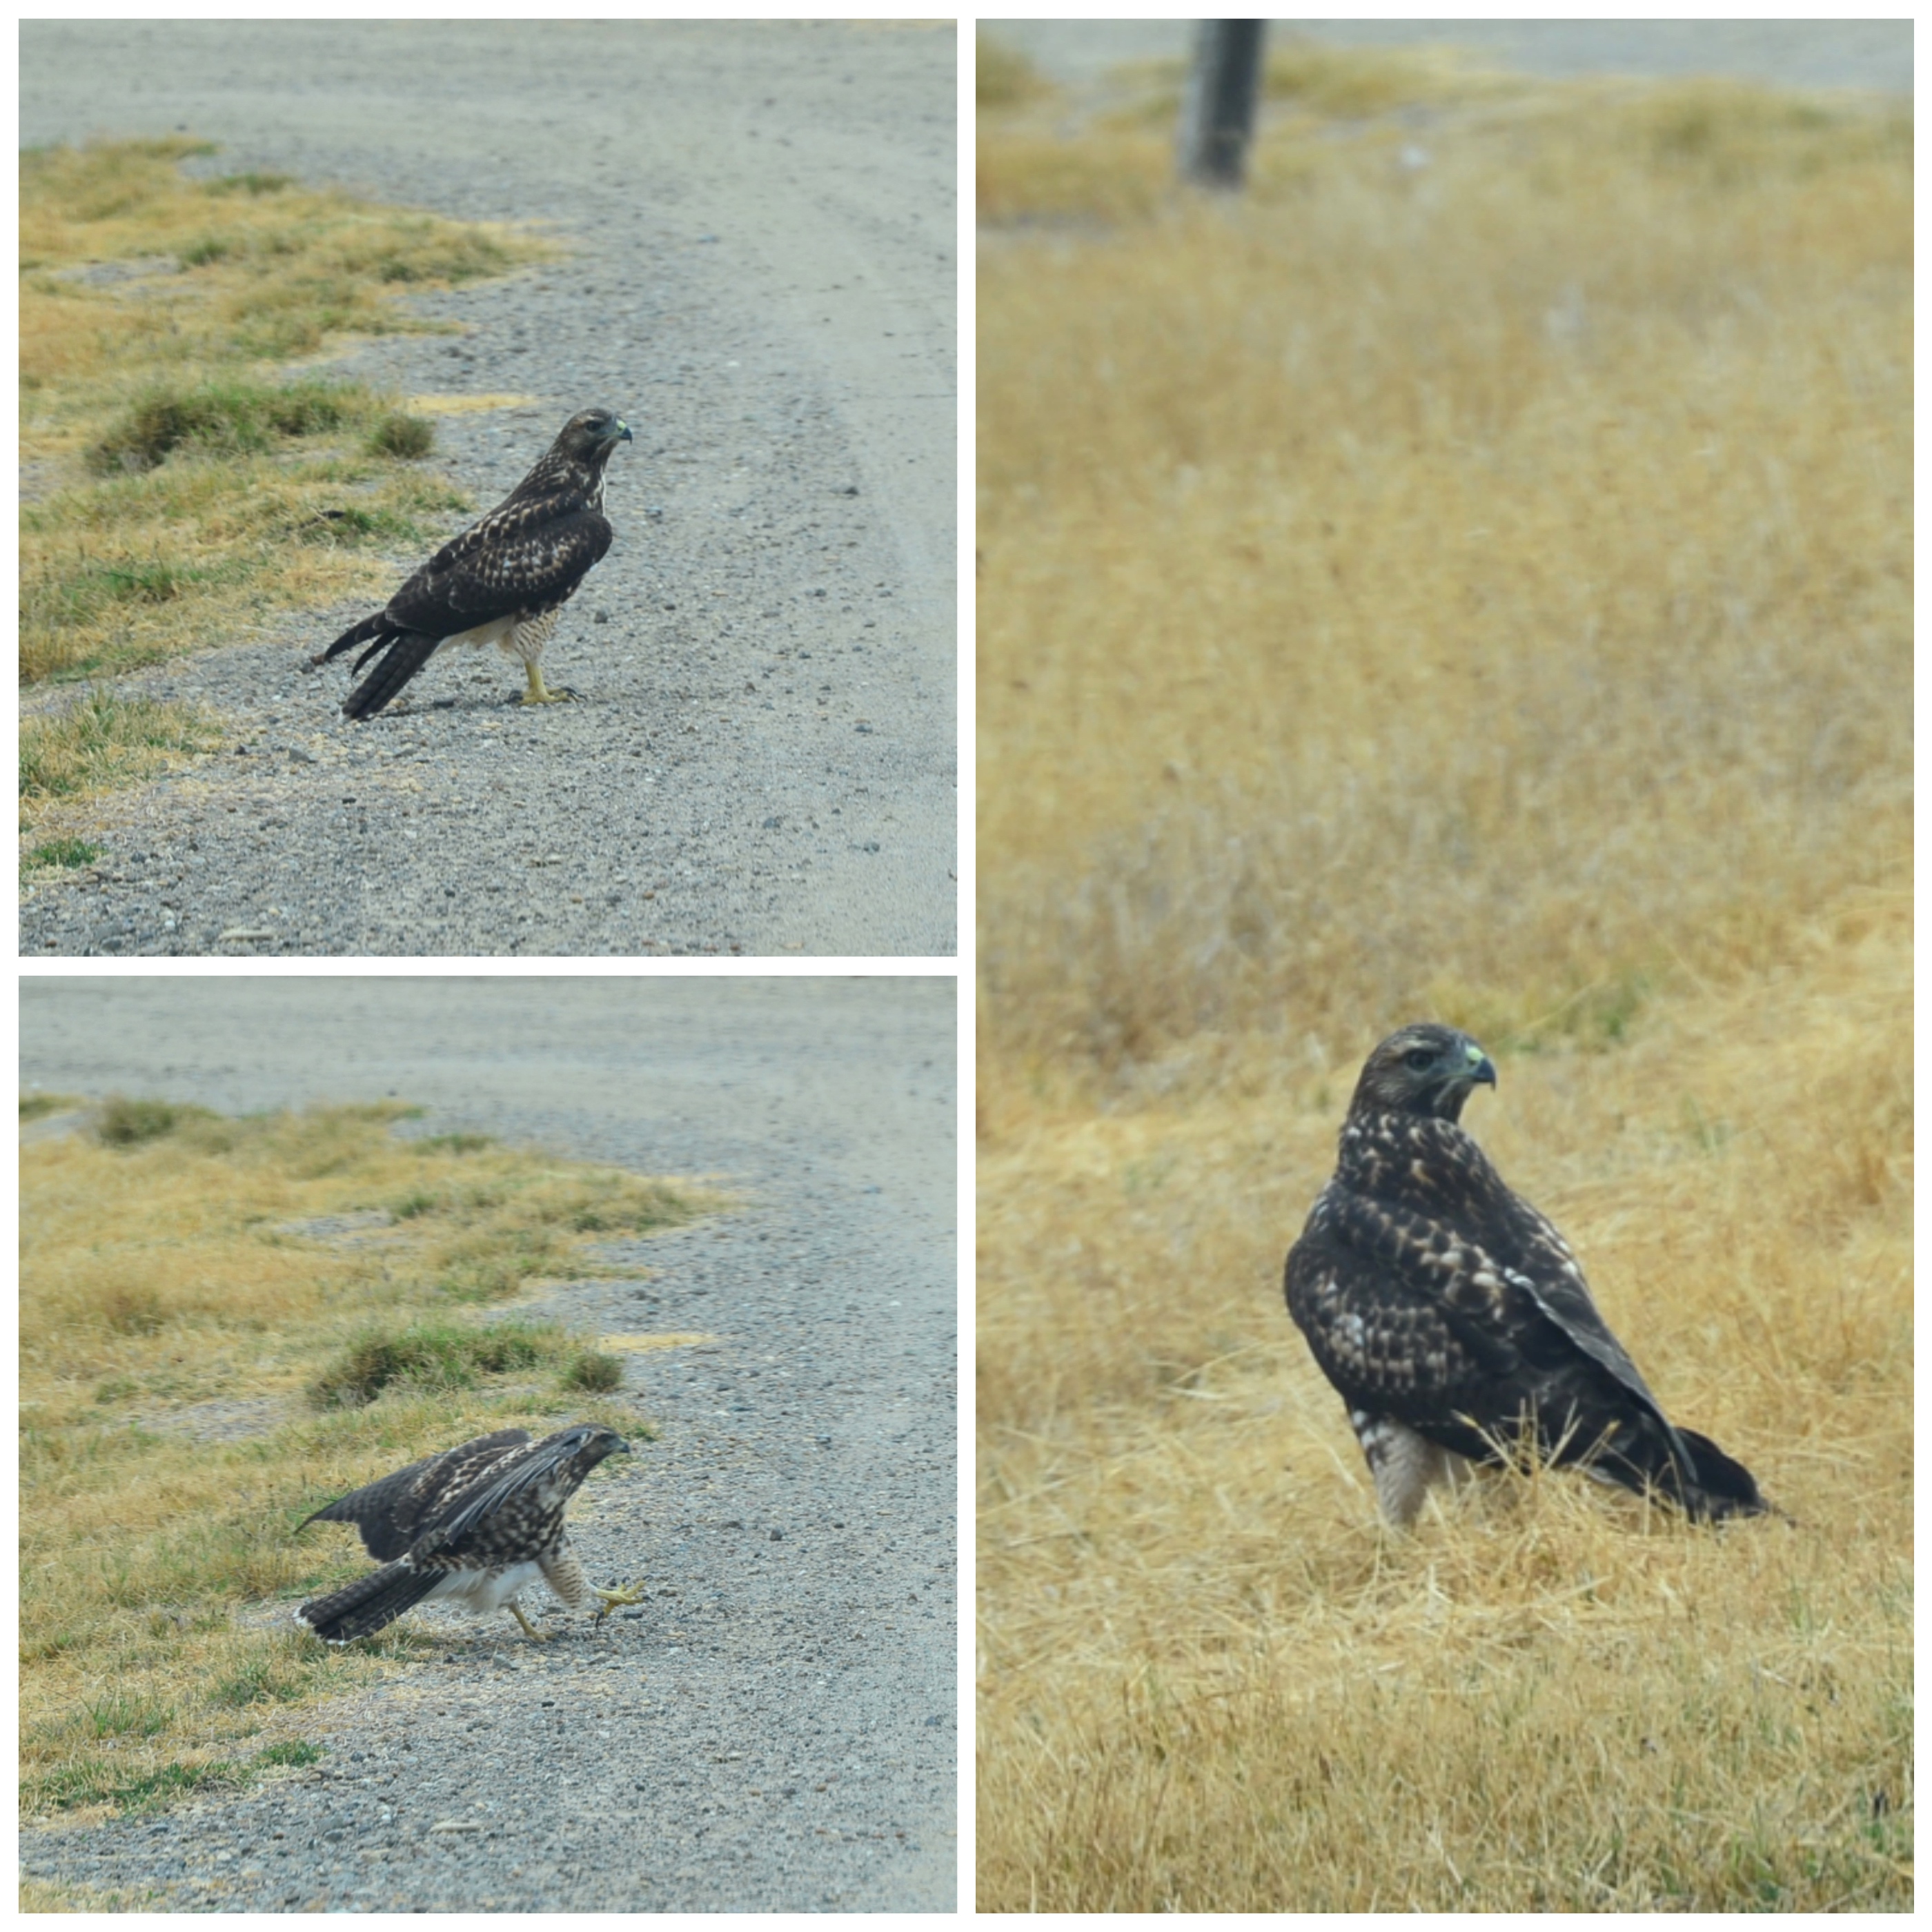 collage of three images displaying a hawk walking on a dirt road around the Conservancy